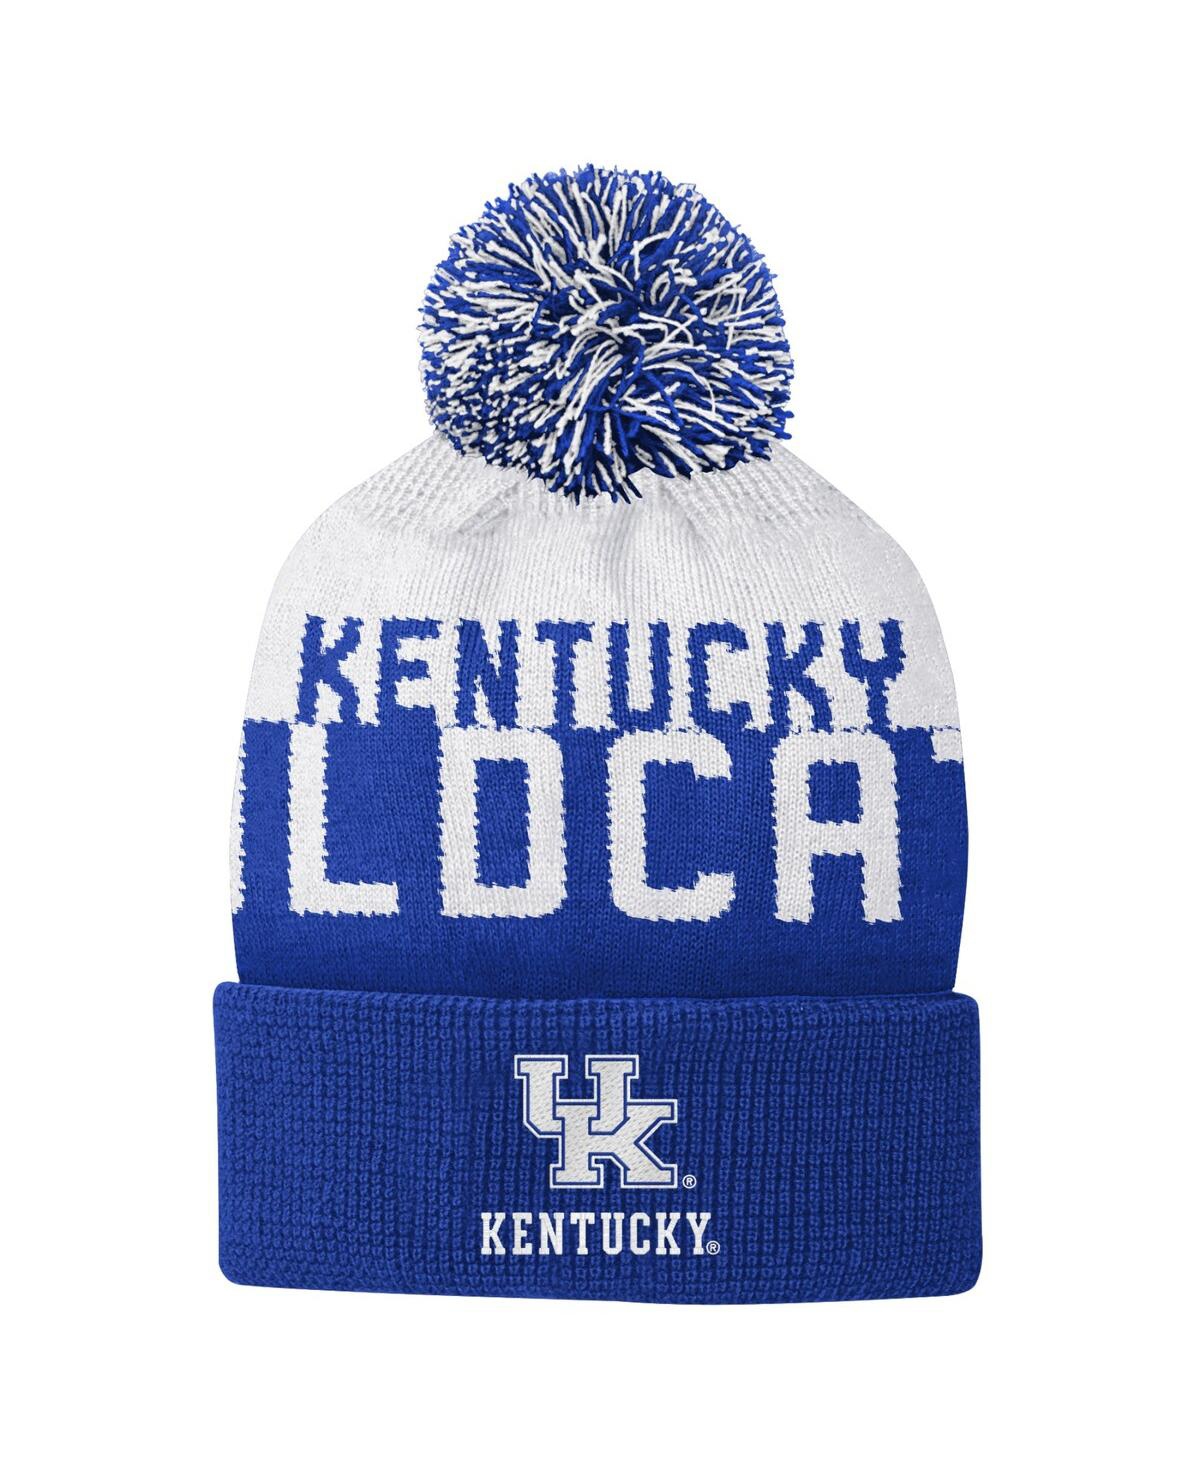 Outerstuff Kids' Youth Boys And Girls White Kentucky Wildcats Patchwork Cuffed Knit Hat With Pom